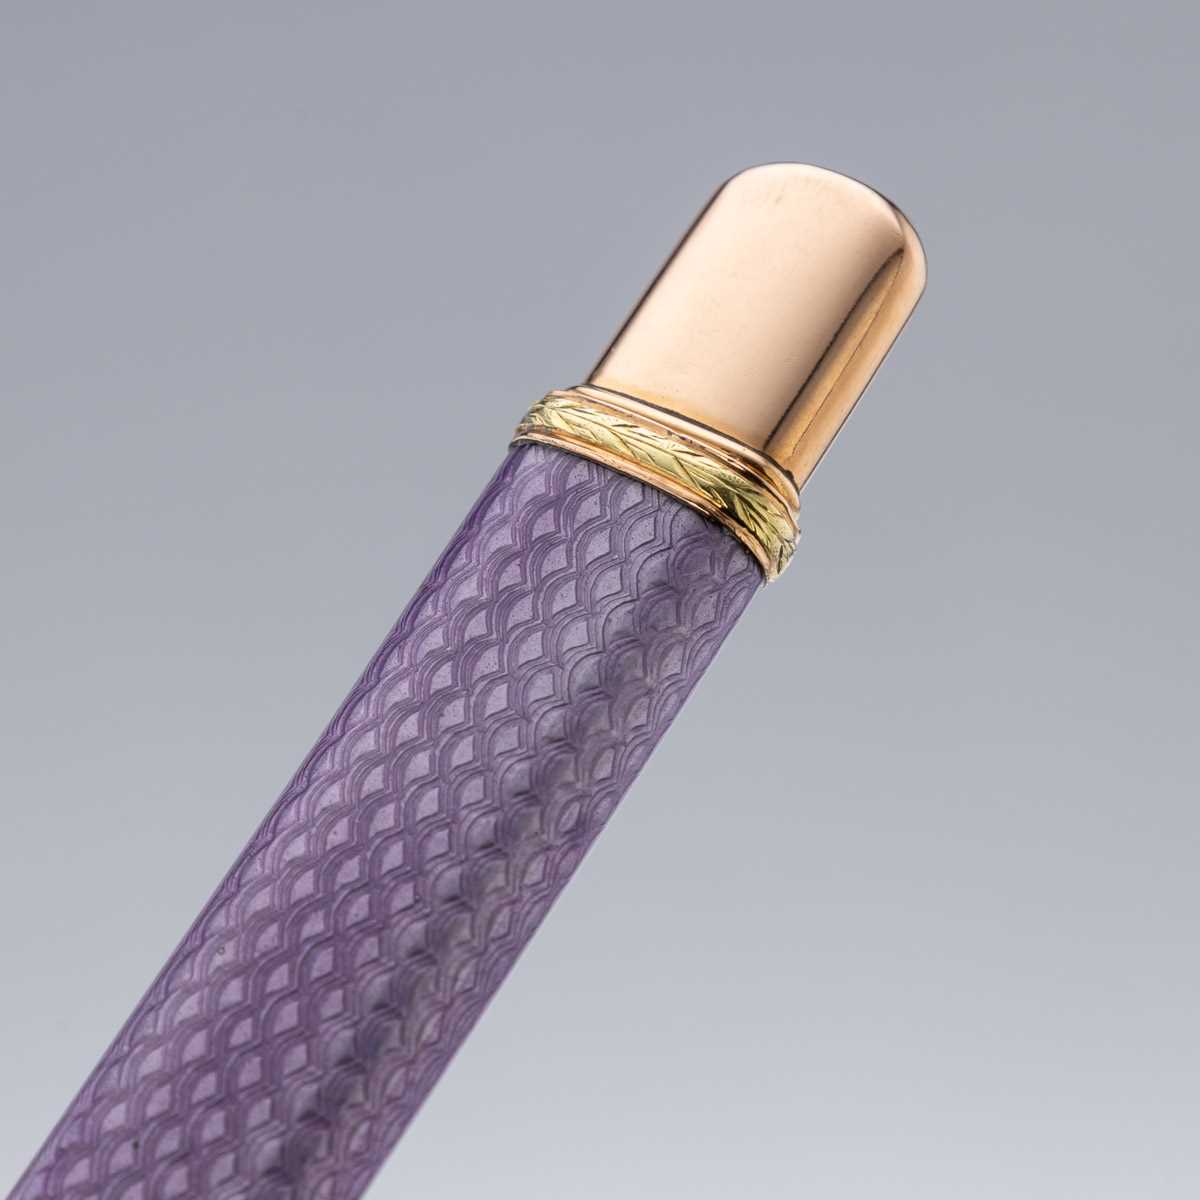 FABERGE: AN EARLY 20TH CENTURY GOLD MOUNTED ENAMEL PENCIL, ALDER, C. 1910 - Image 5 of 10